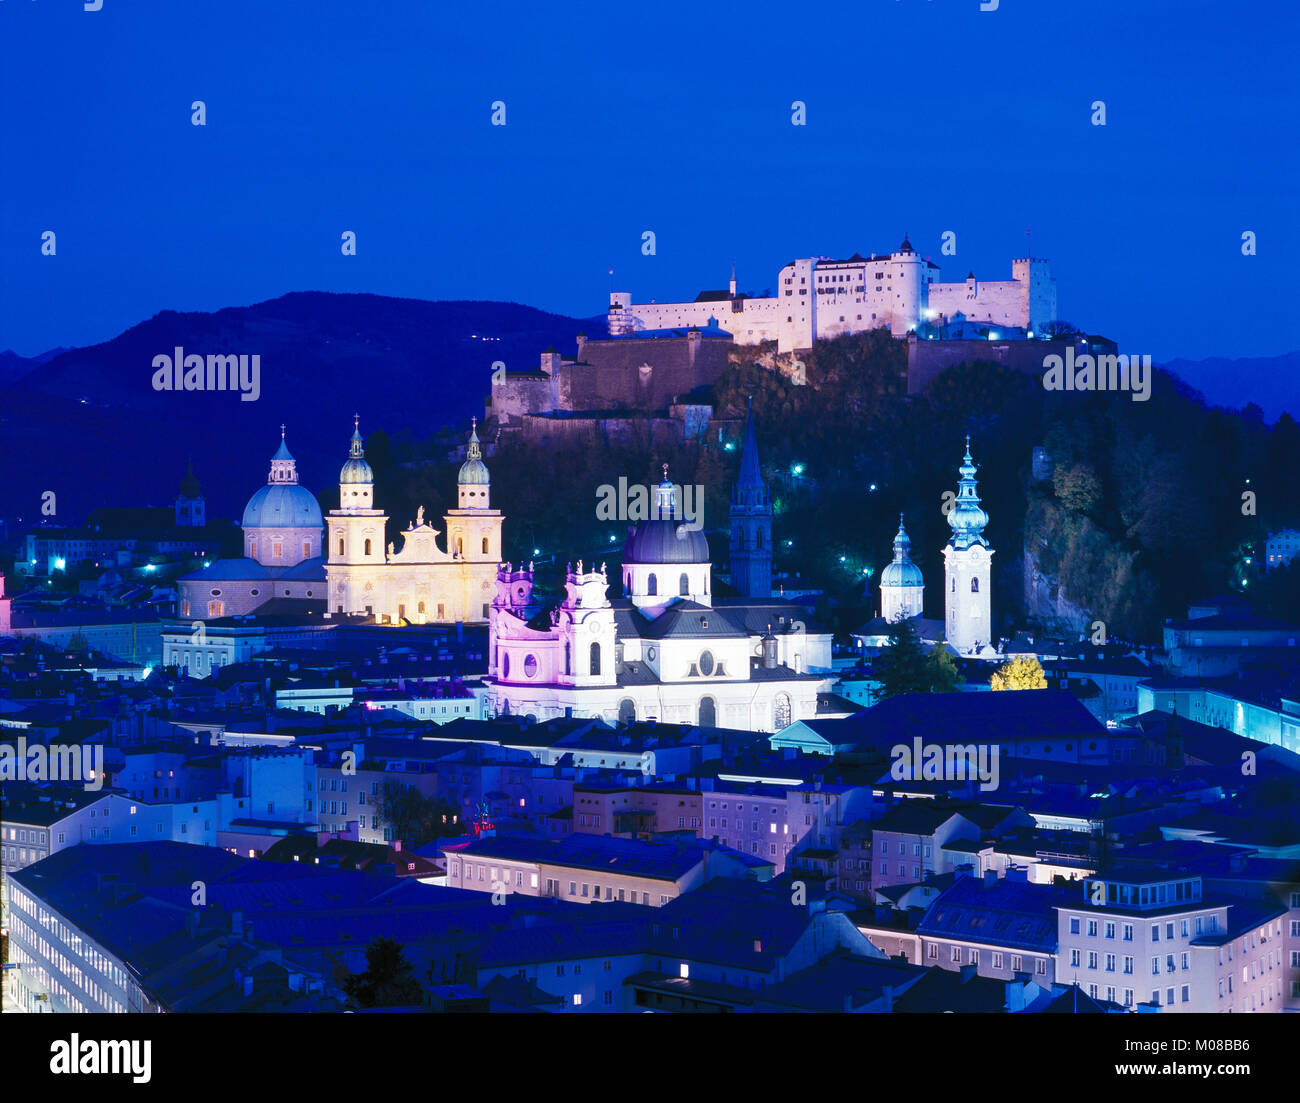 Spires and domes of Salzburg, overlooked by the Hohenzollern Castle, Salzburg, Austria Stock Photo